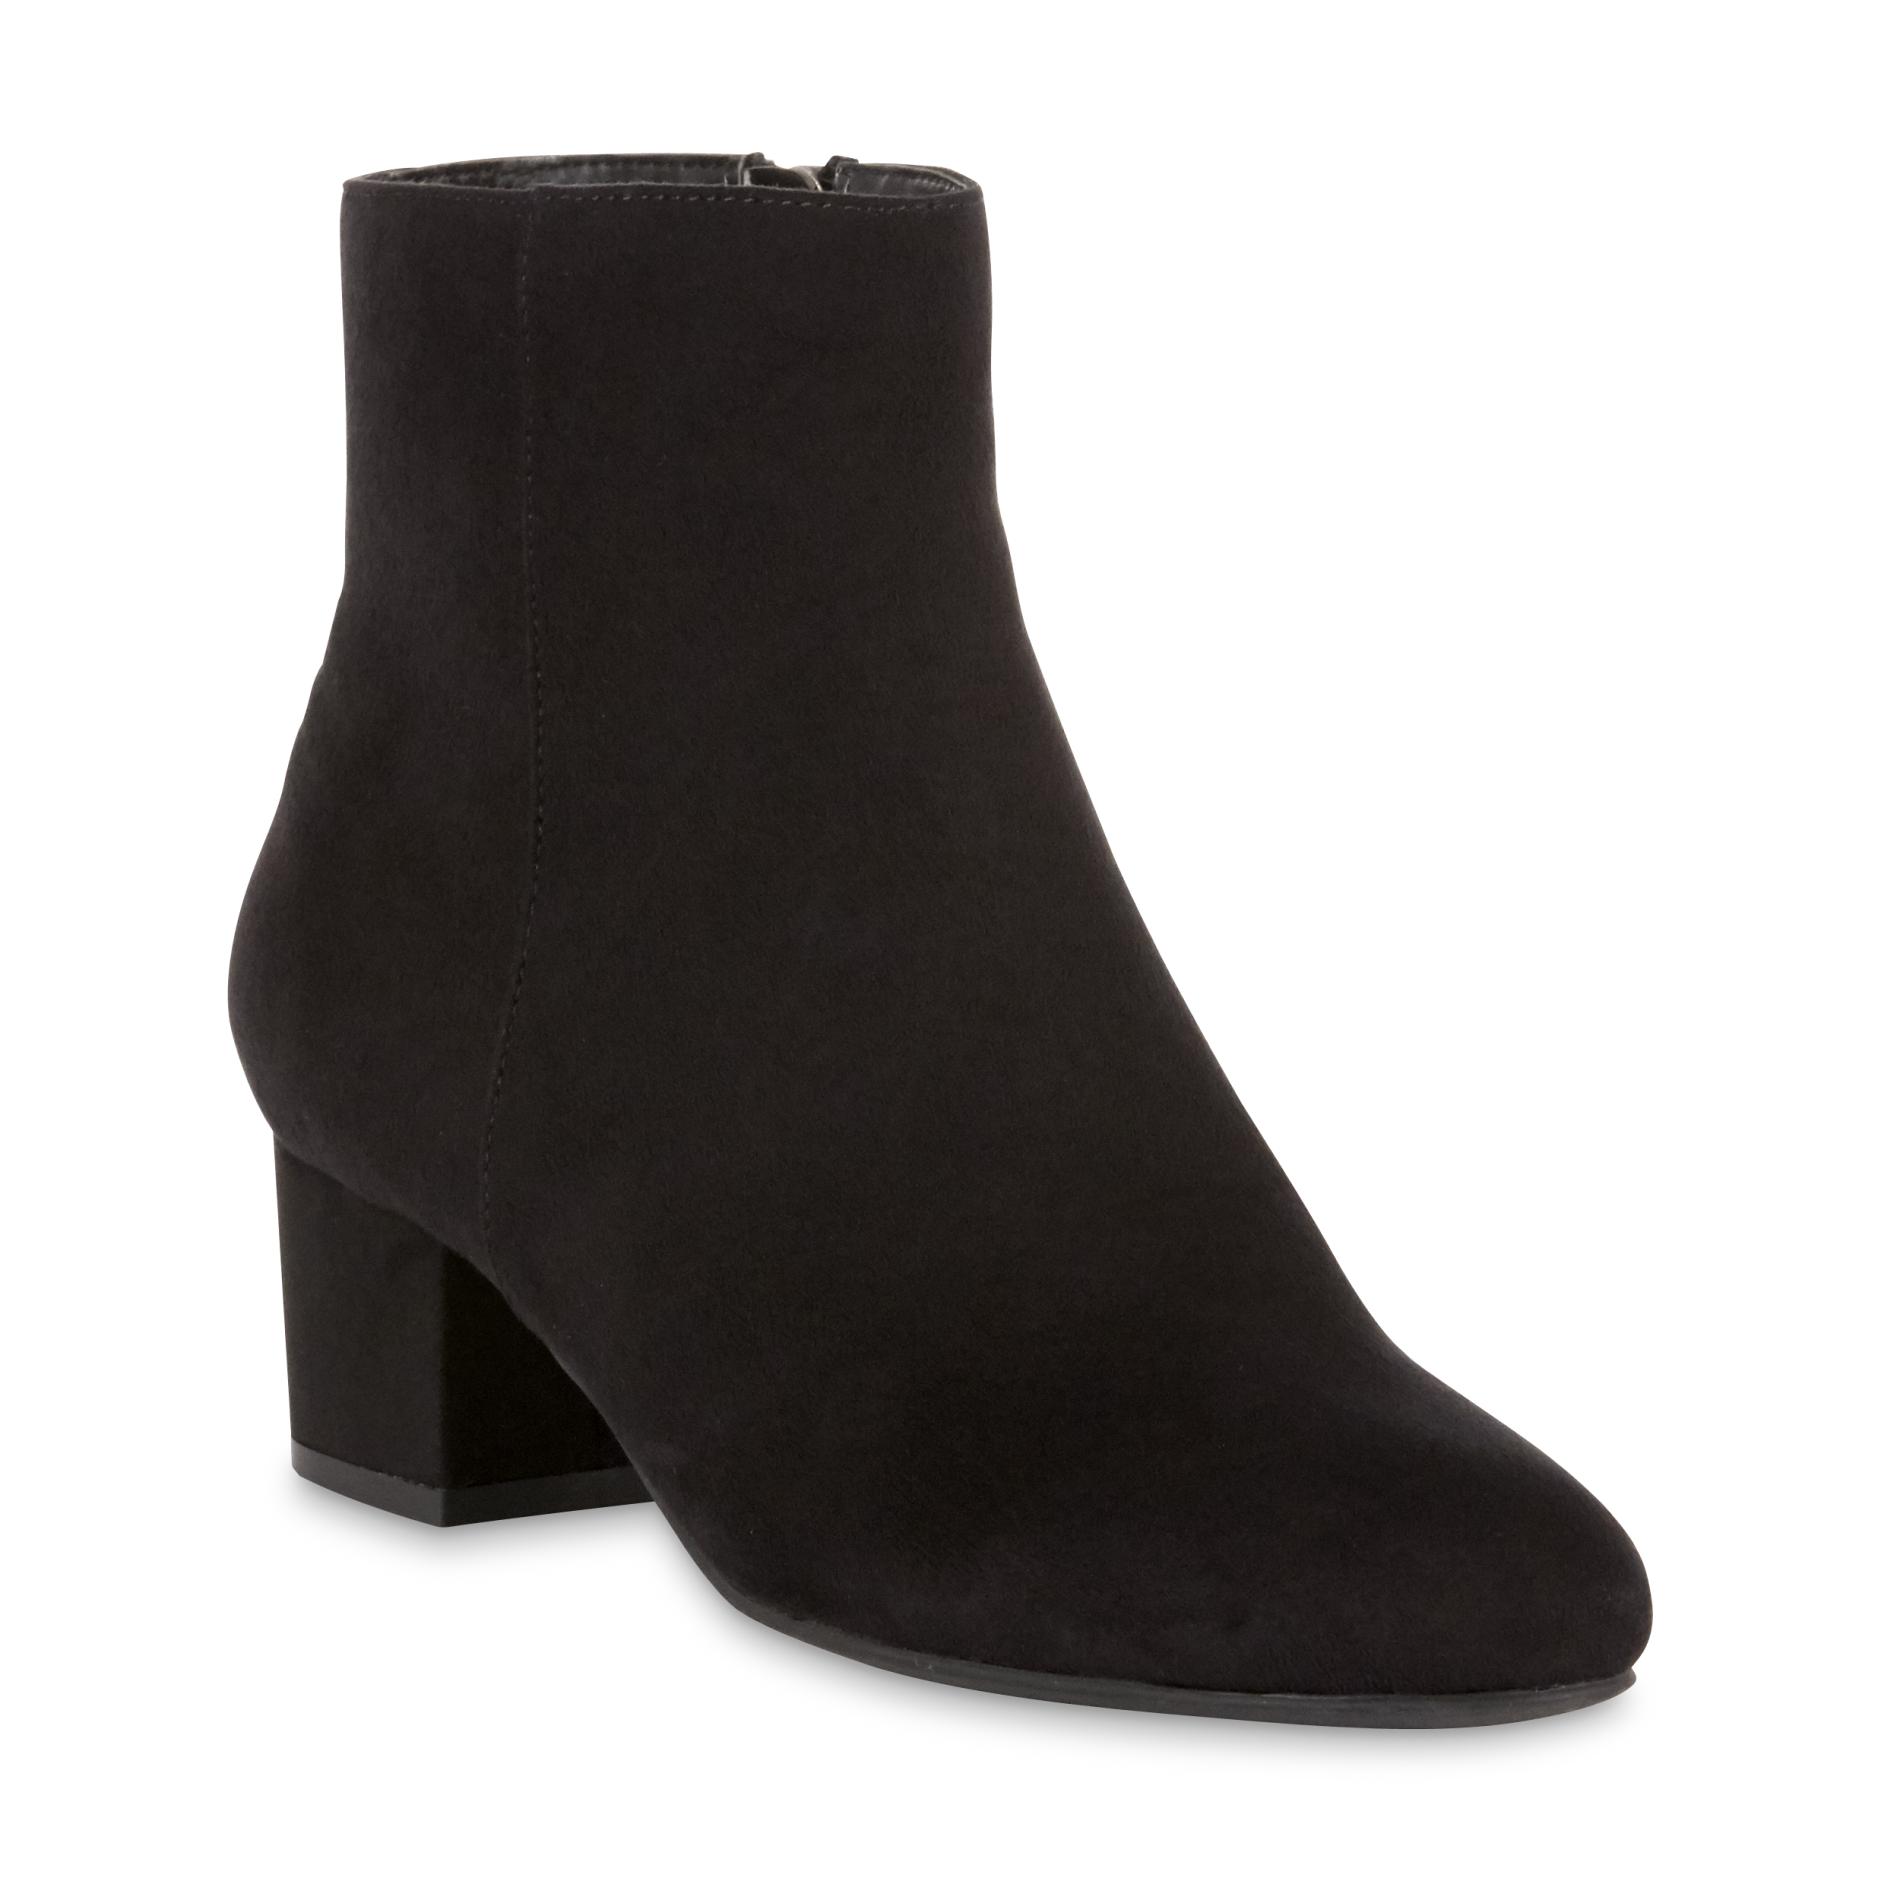 Simply Styled Women's Bianca Boot - Black